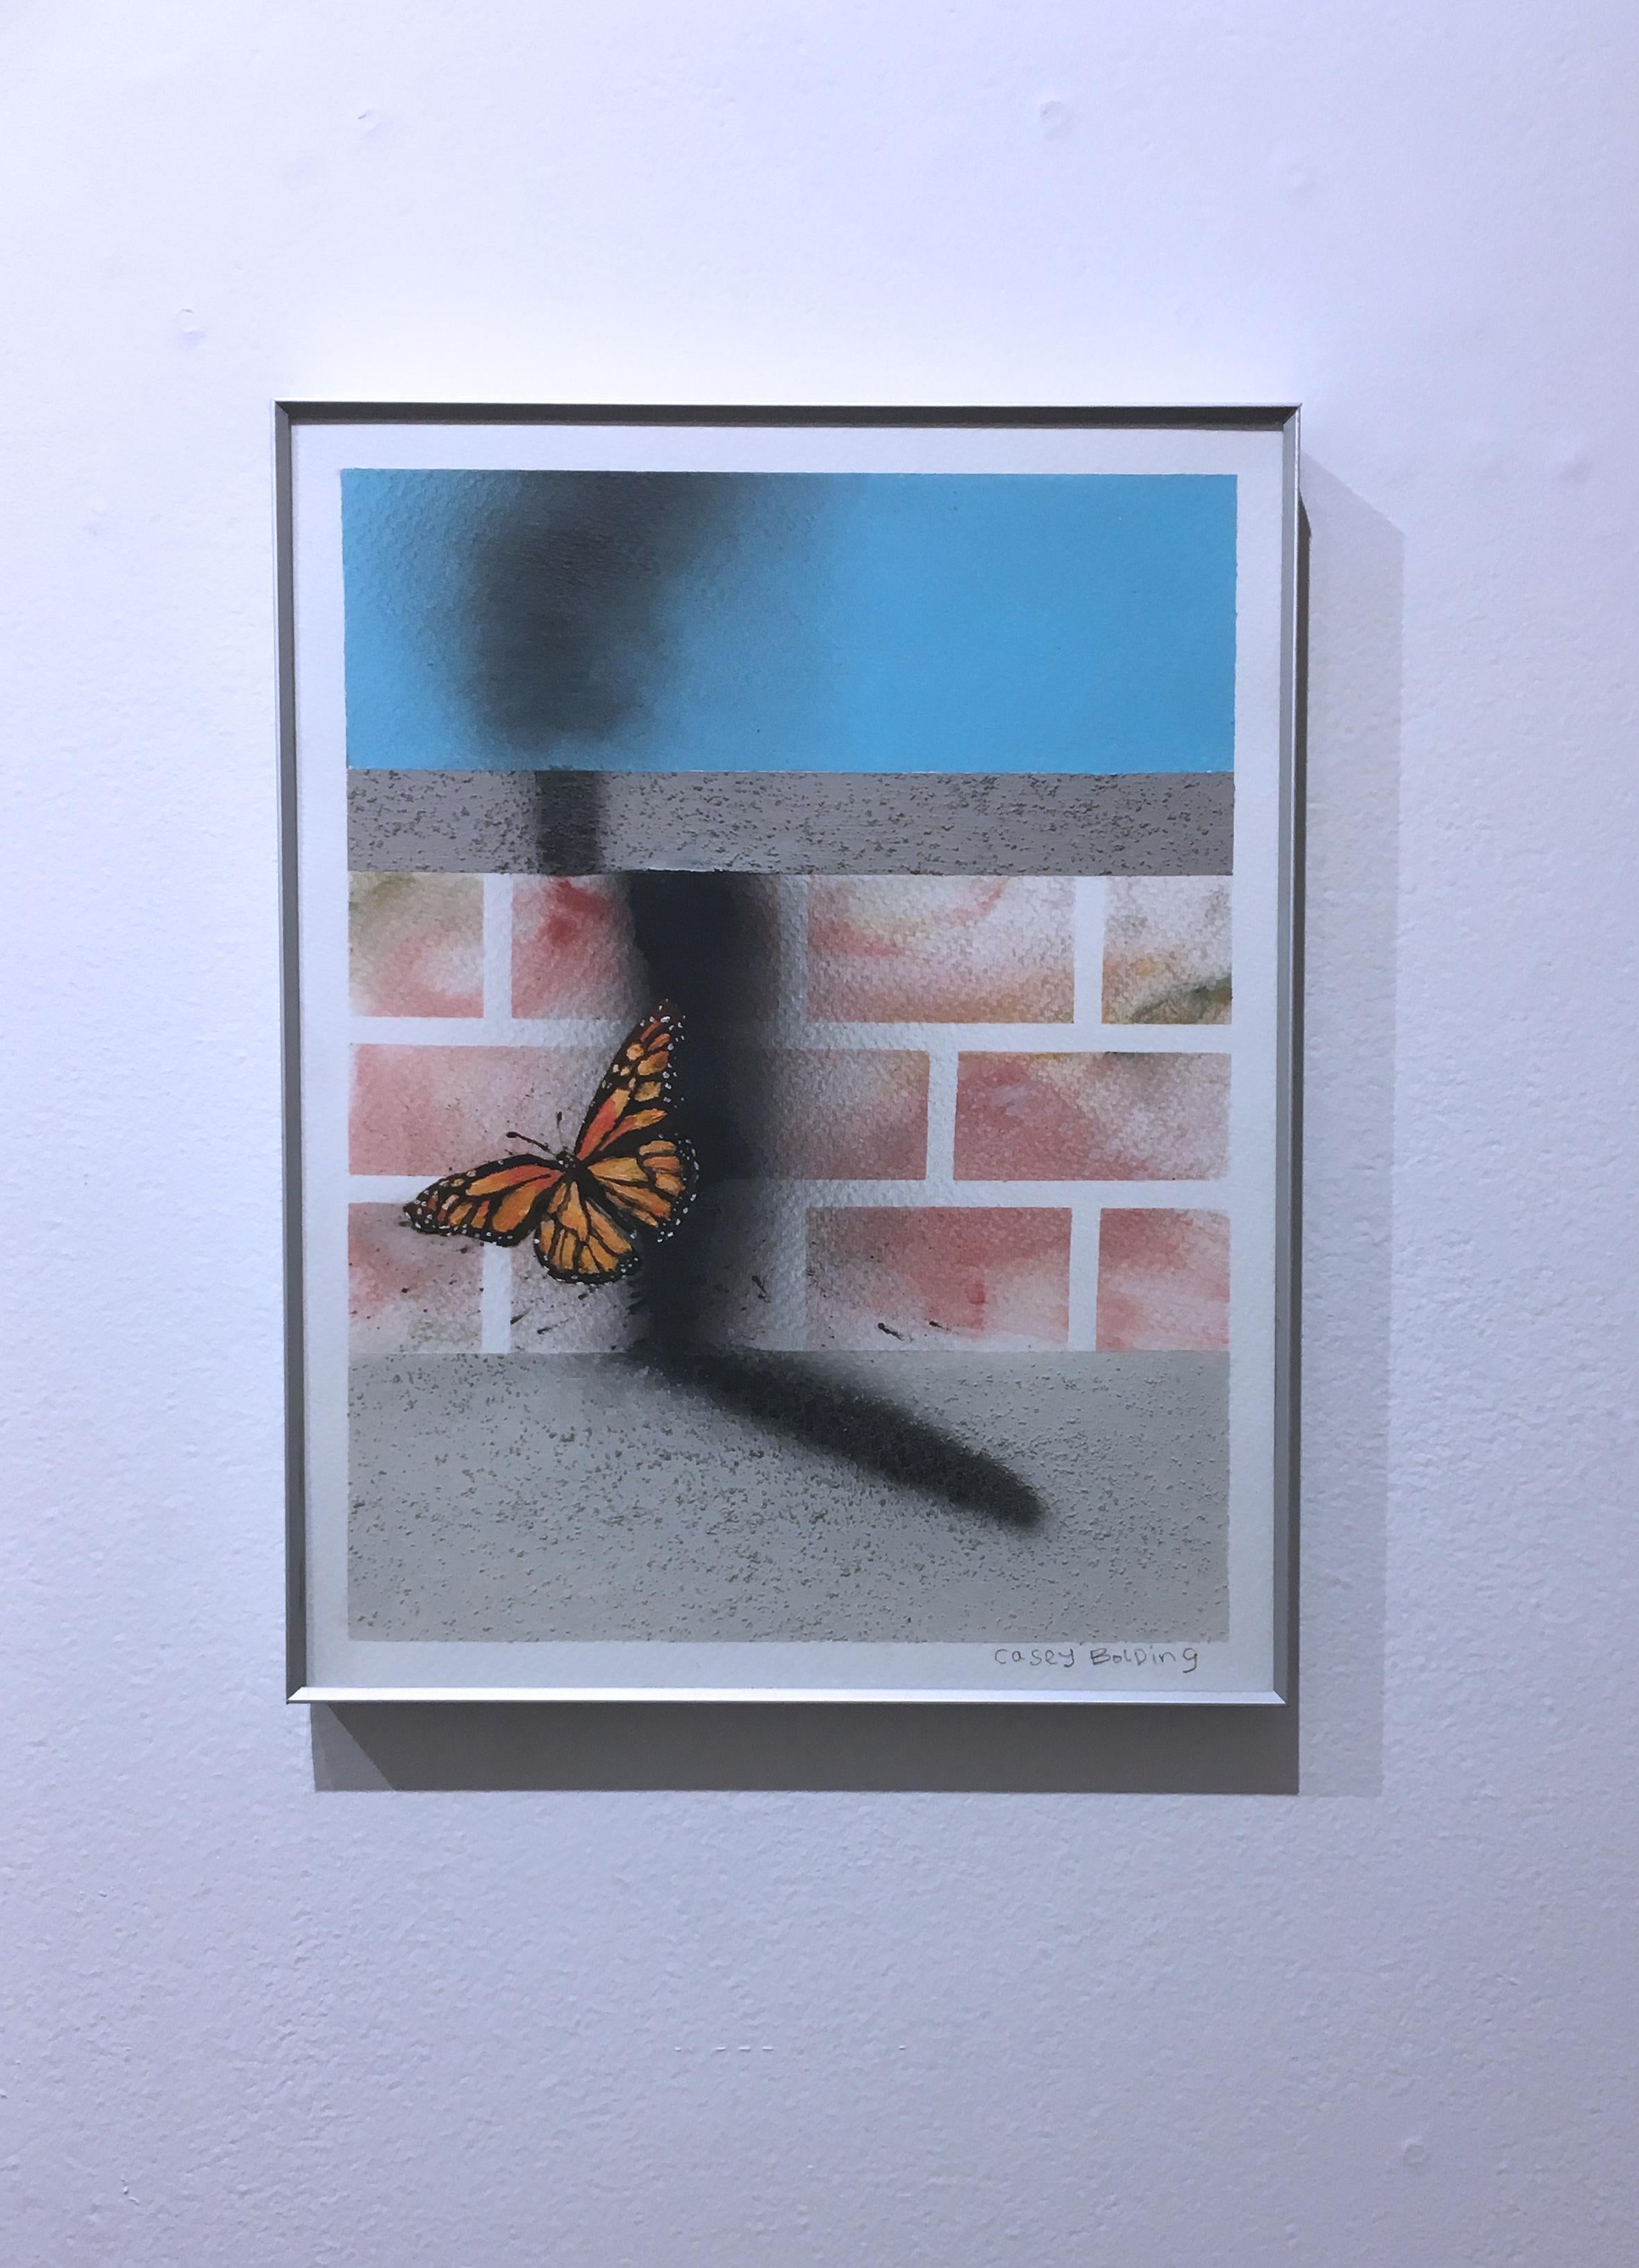 Untitled, (Butterfly), 2018, Monarch, sky blue & brick surreal cityscape, paper - Painting by Casey Bolding